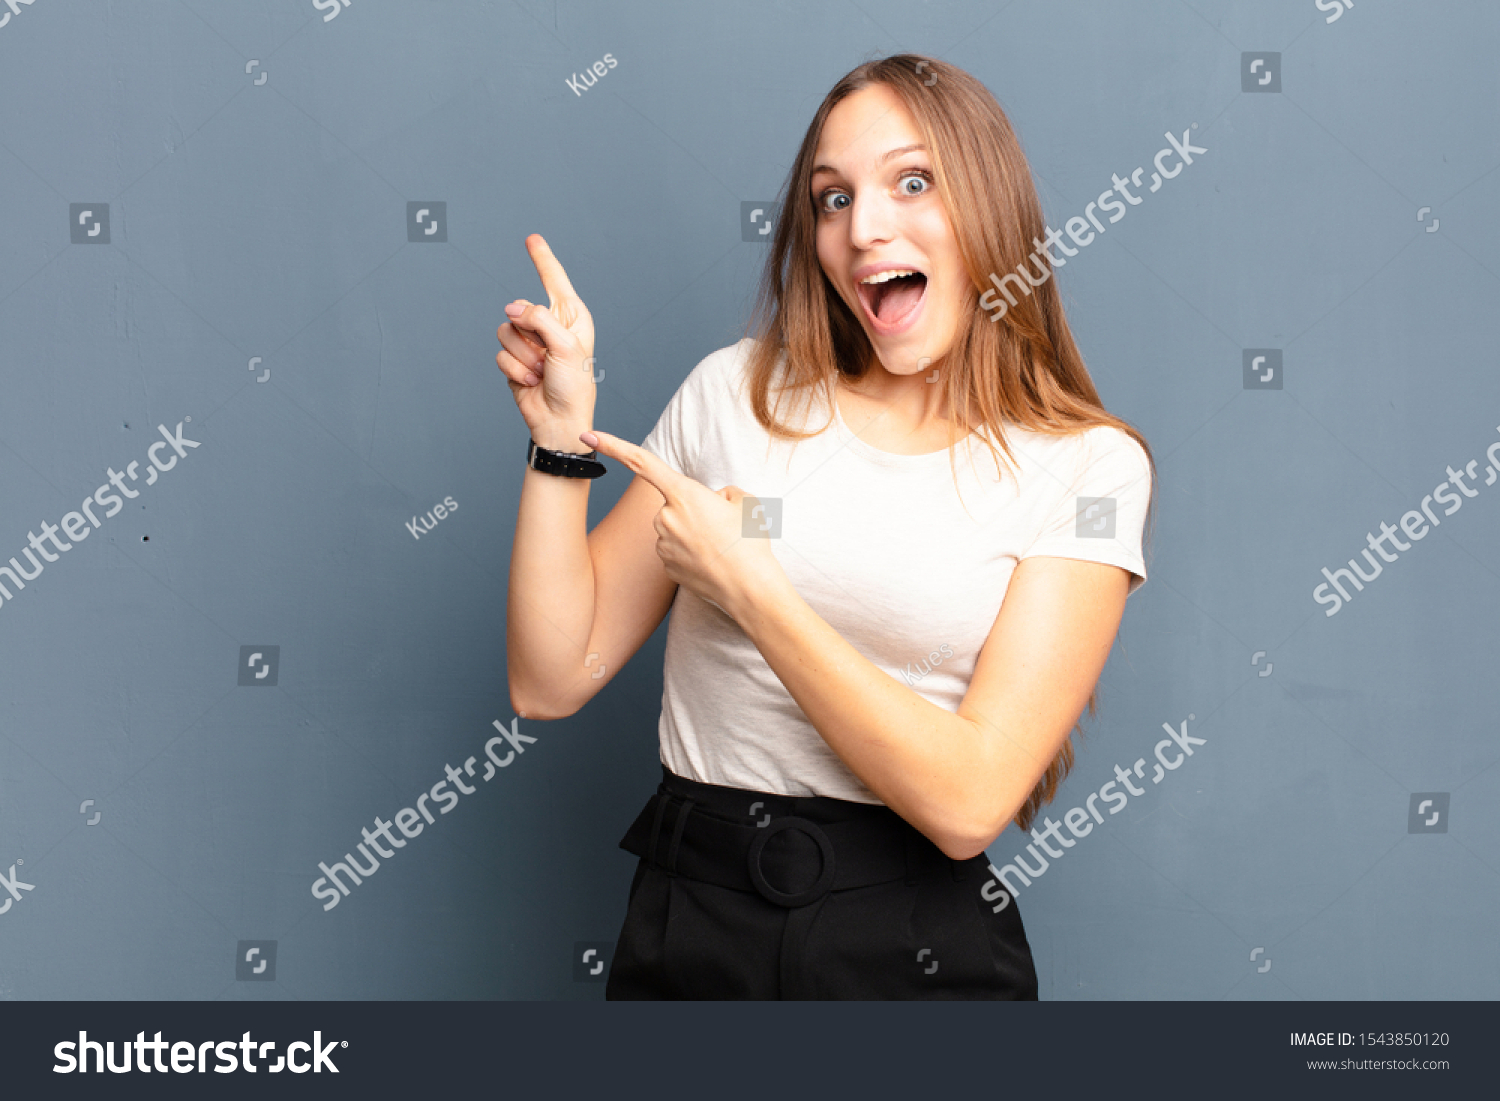 young pretty woman feeling joyful and surprised, smiling with a shocked expression and pointing to the side against gray background #1543850120